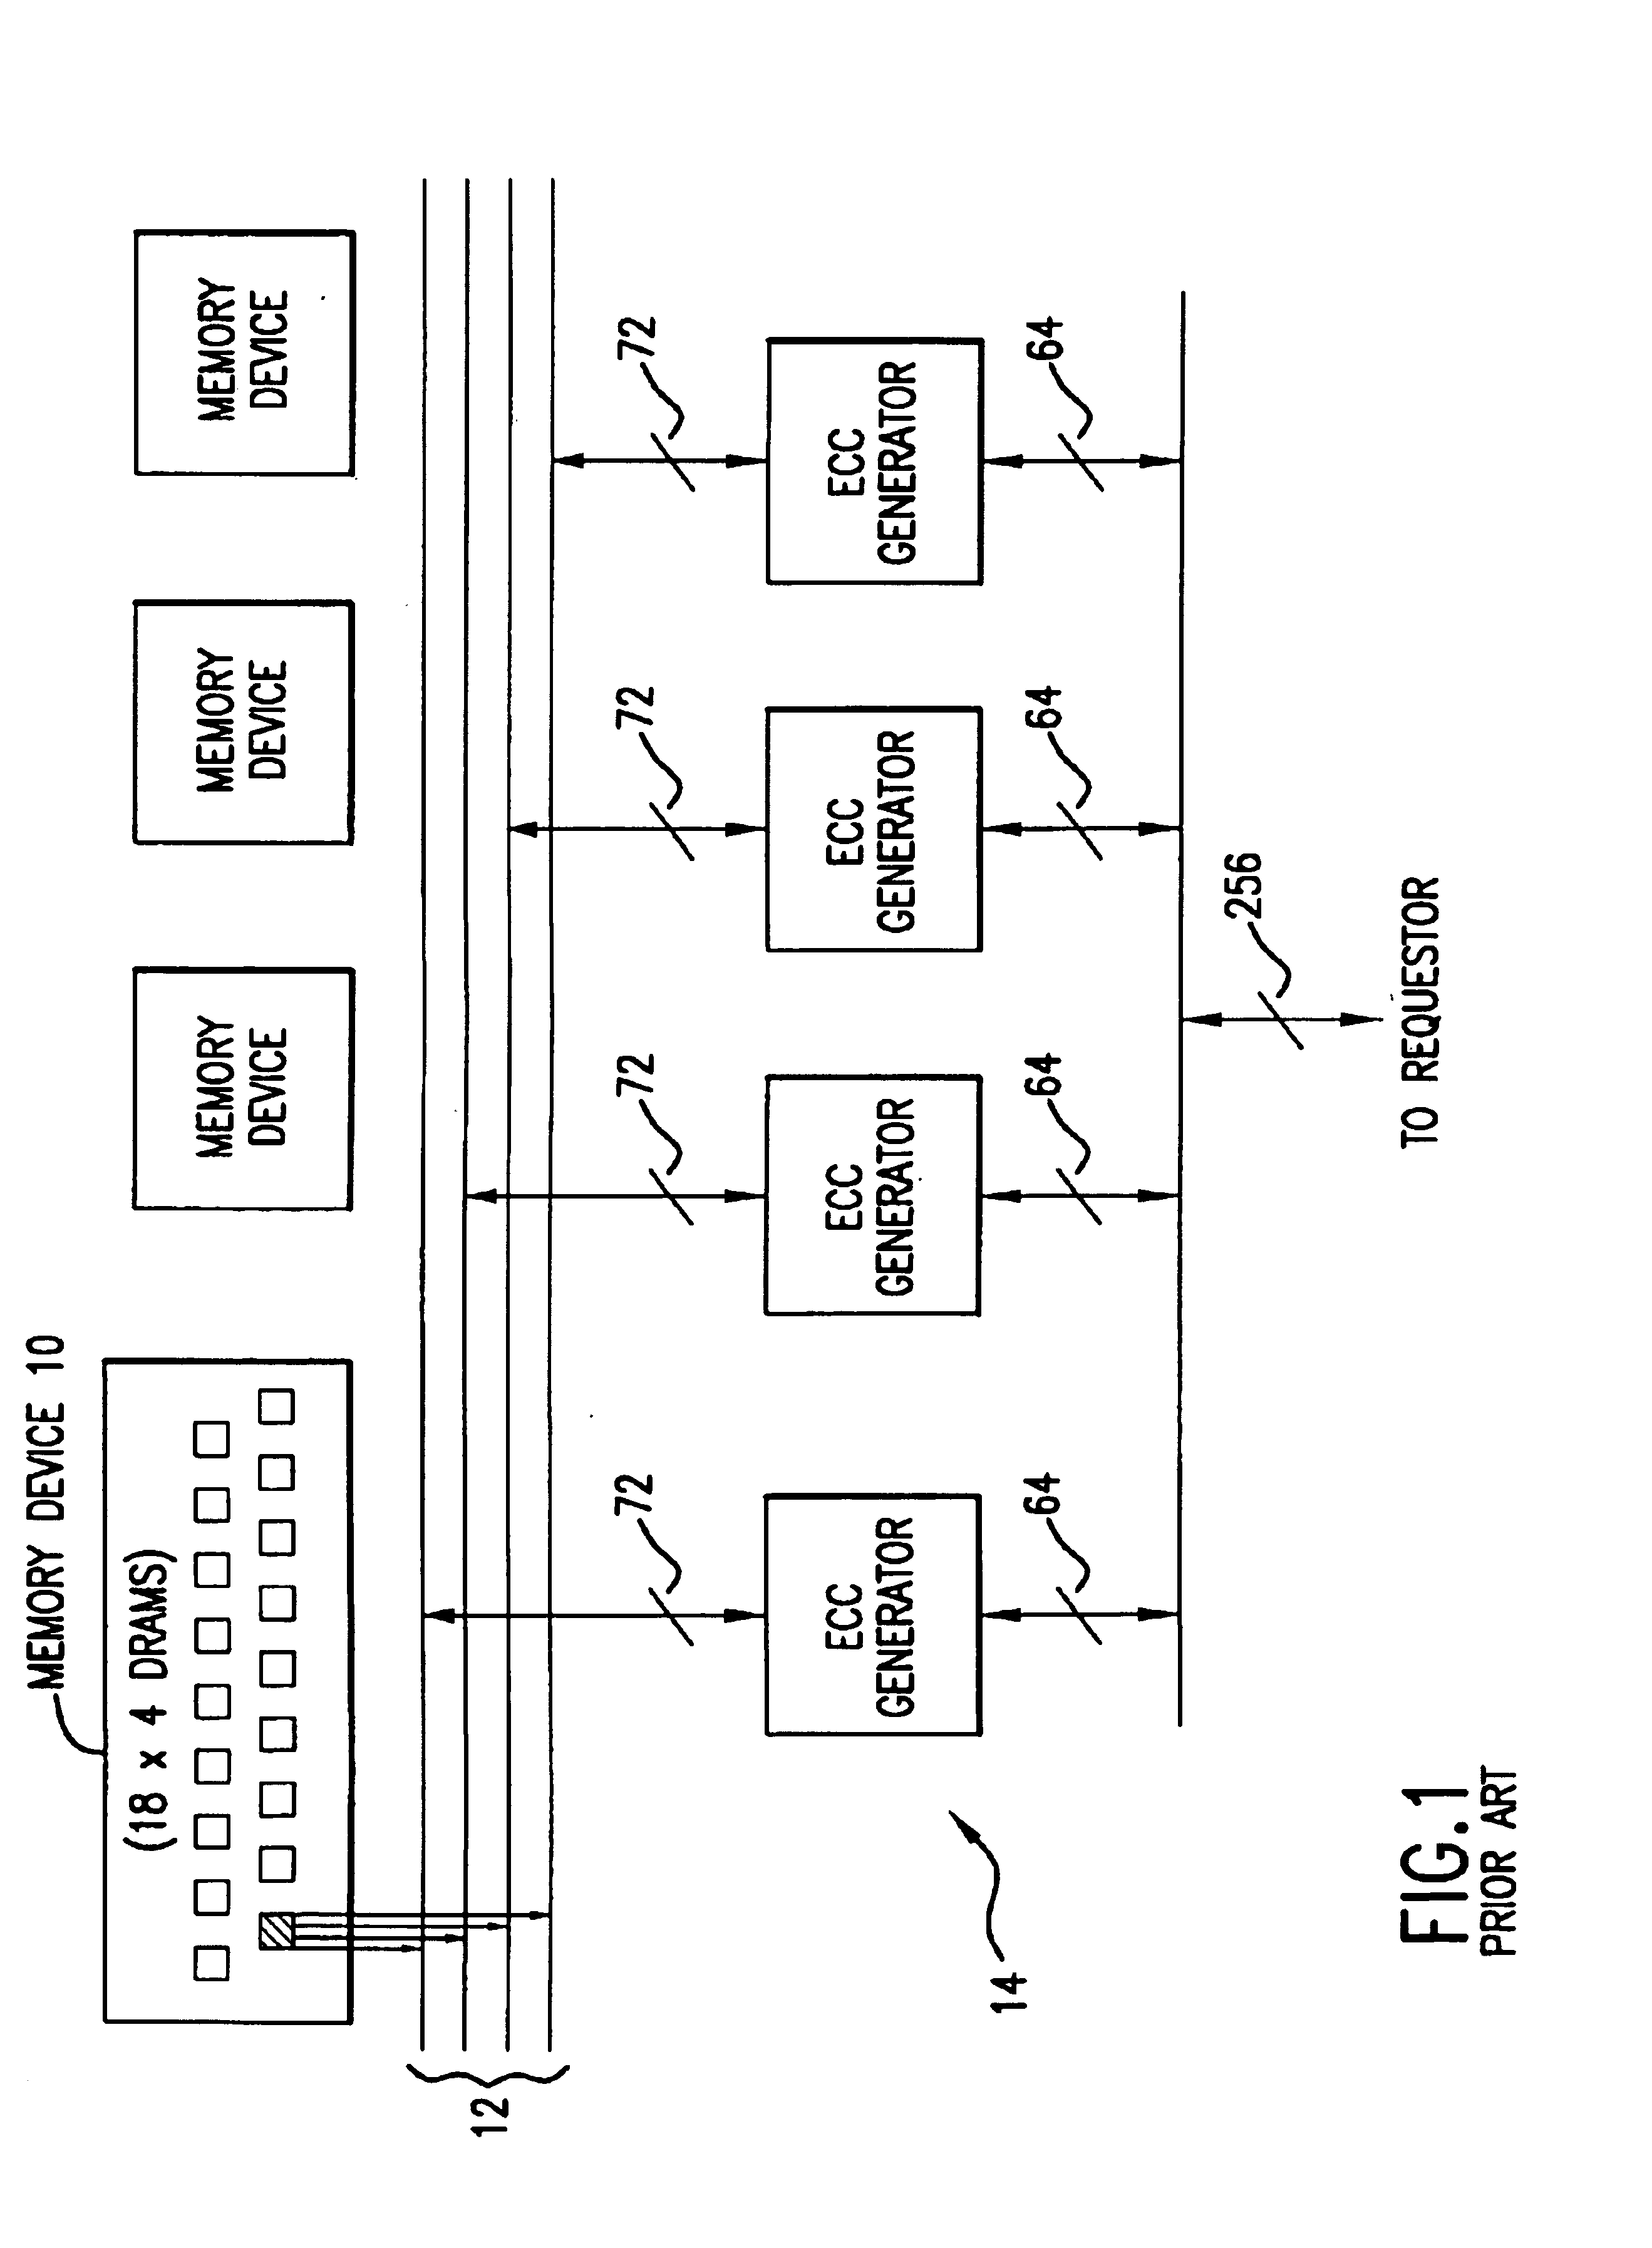 Memory module with offset data lines and bit line swizzle configuration